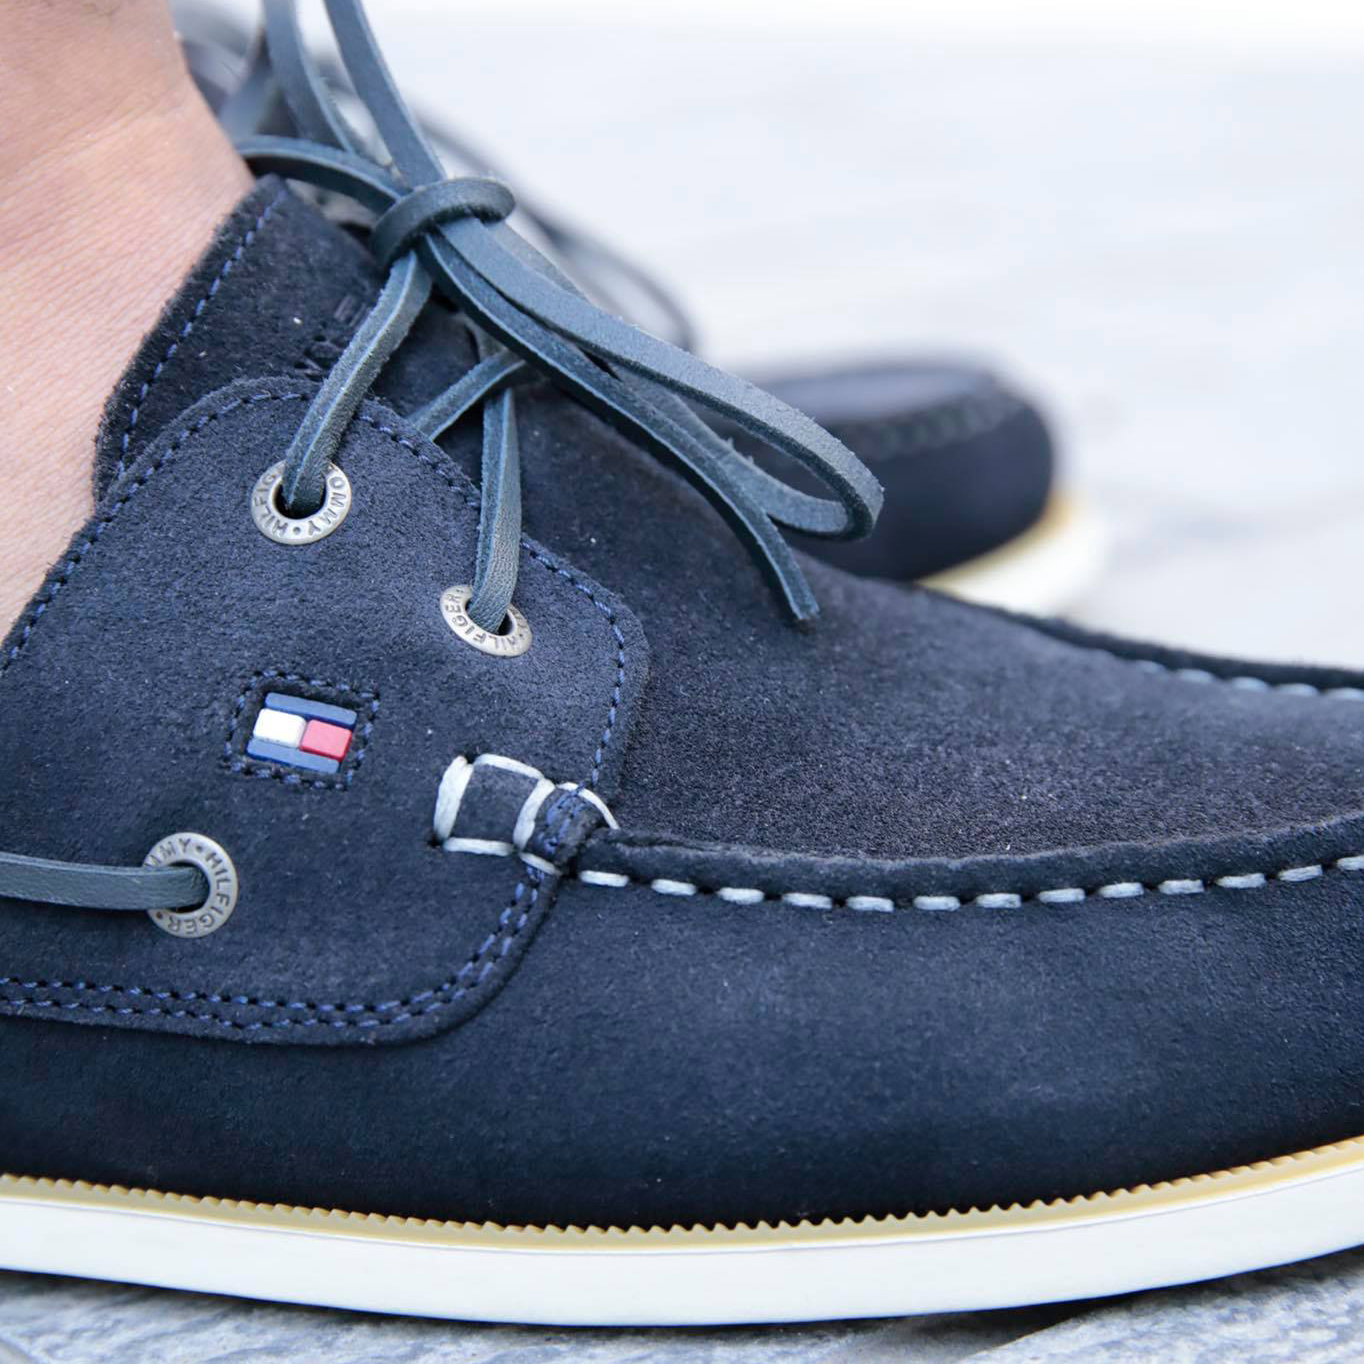 Chaussures pour homme